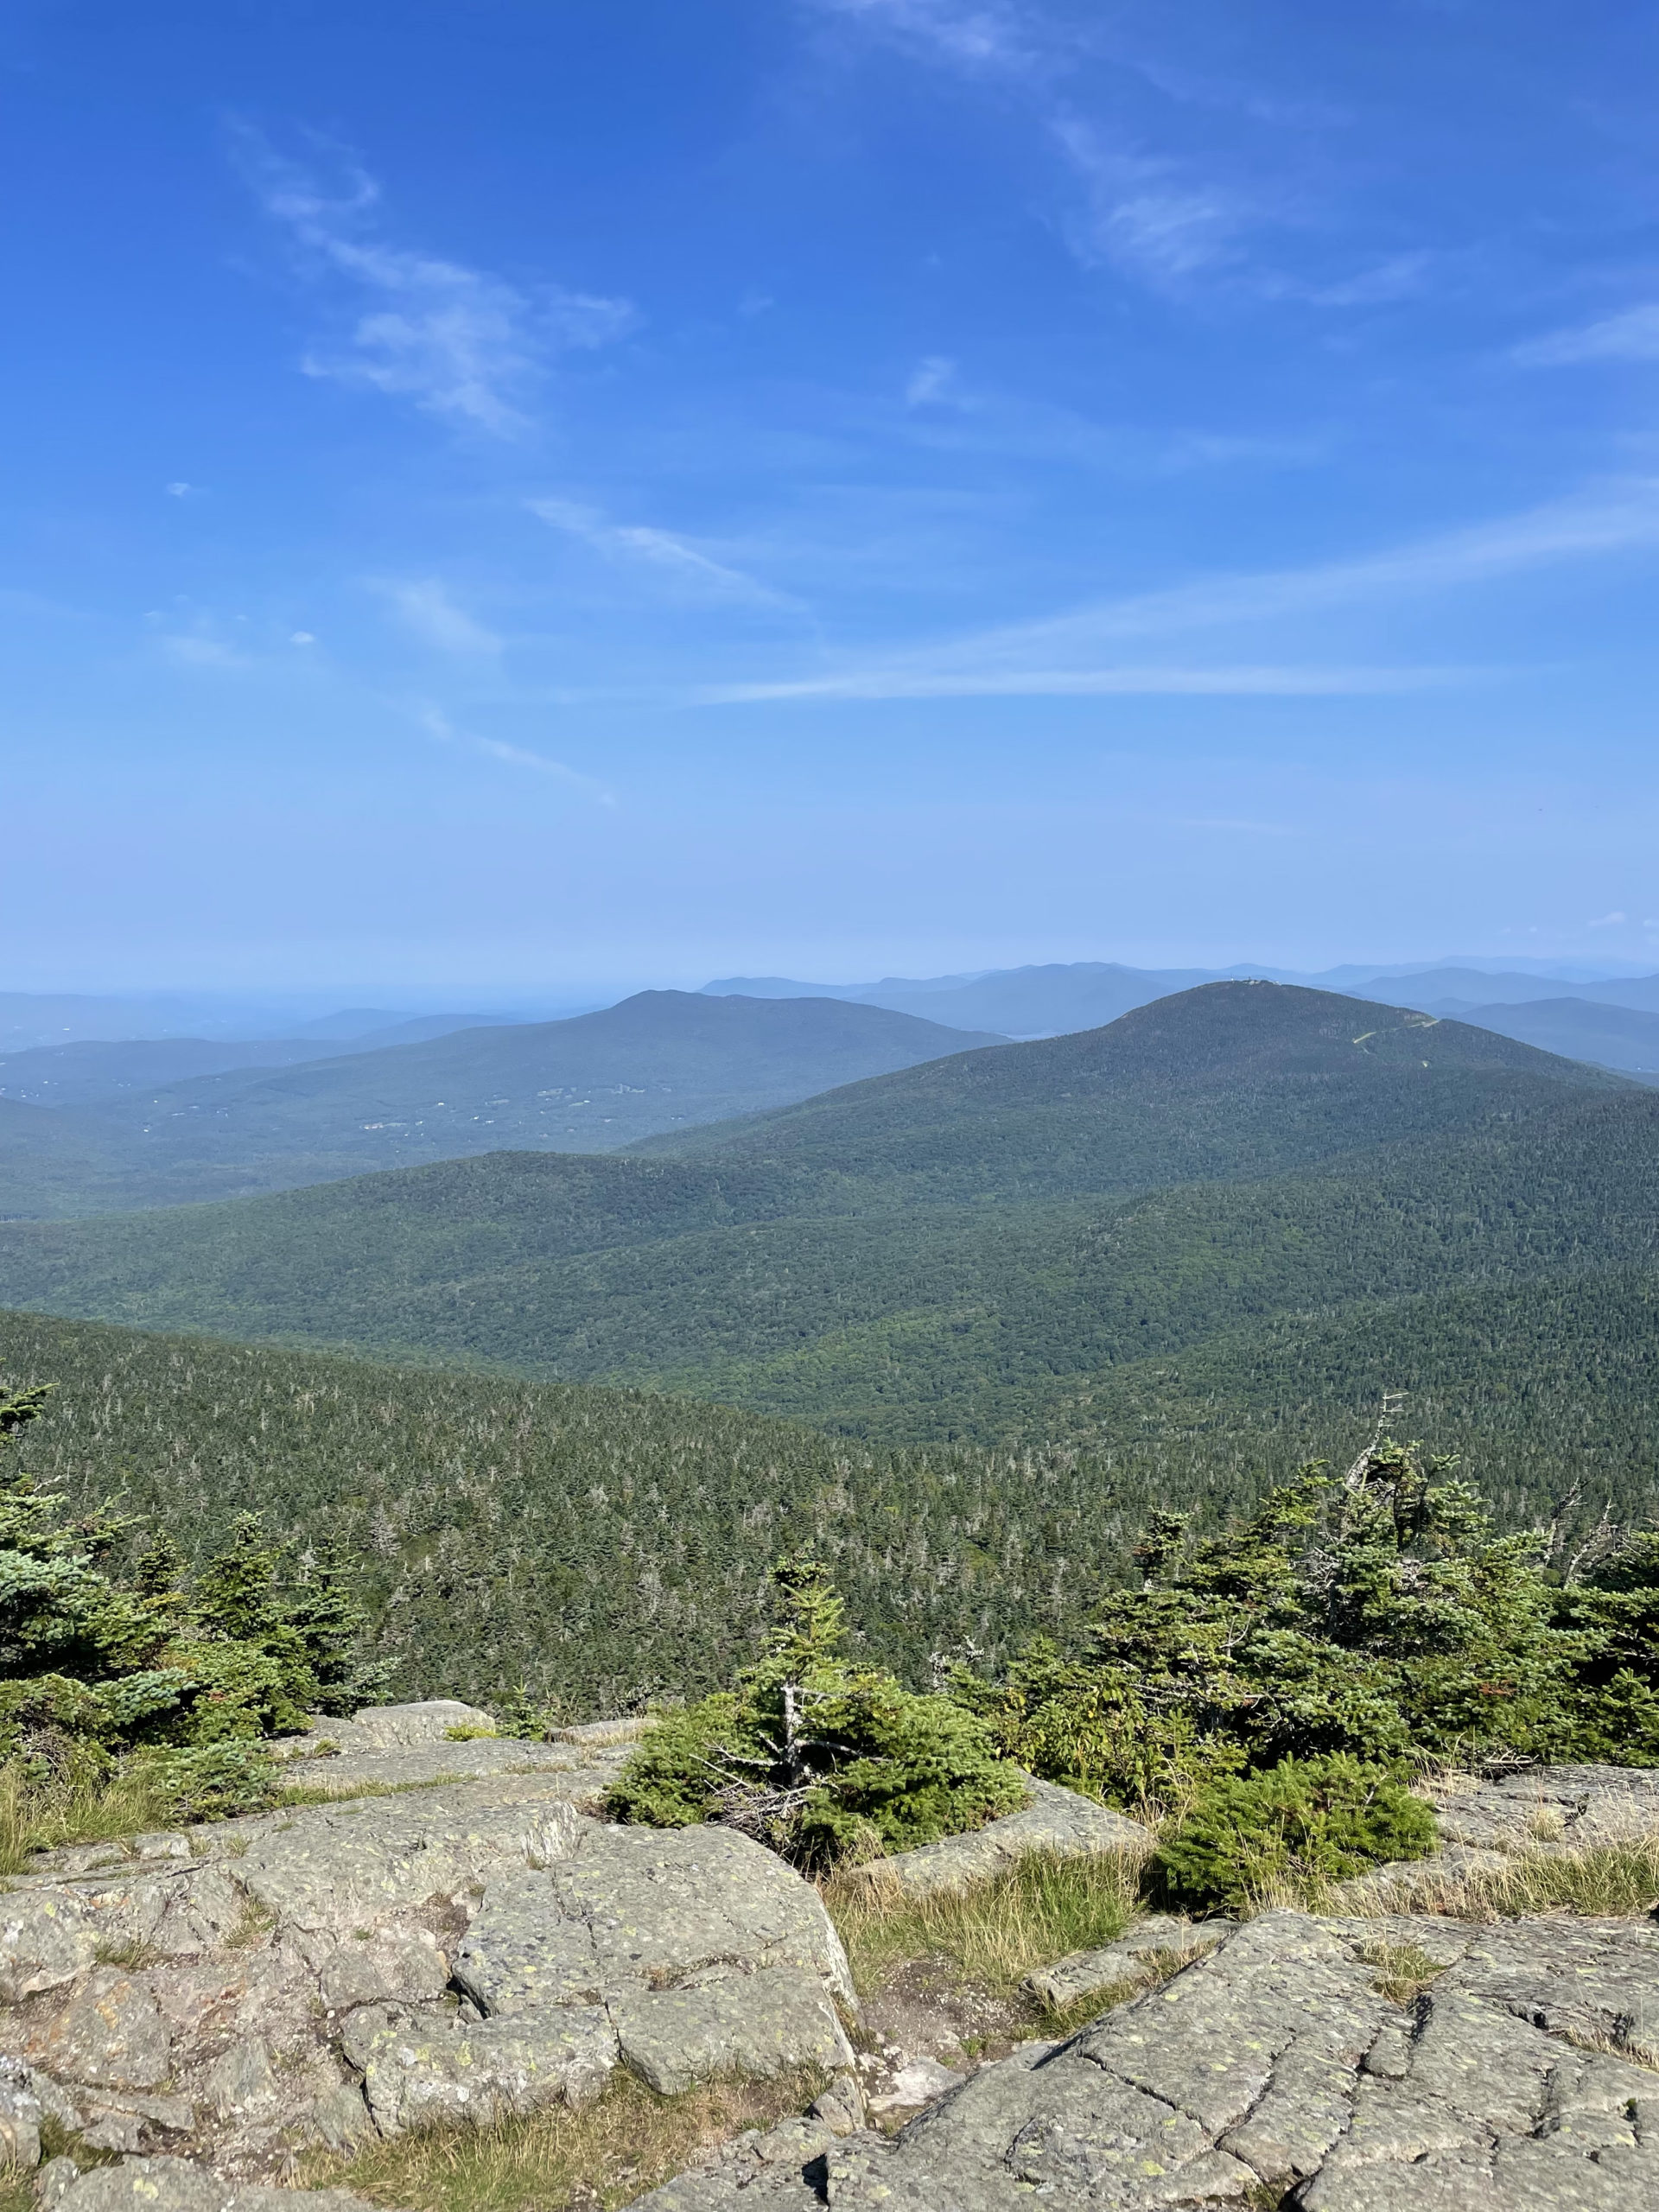 View from the summit, seen while hiking Killington Peak in the Green Mountains, Vermont